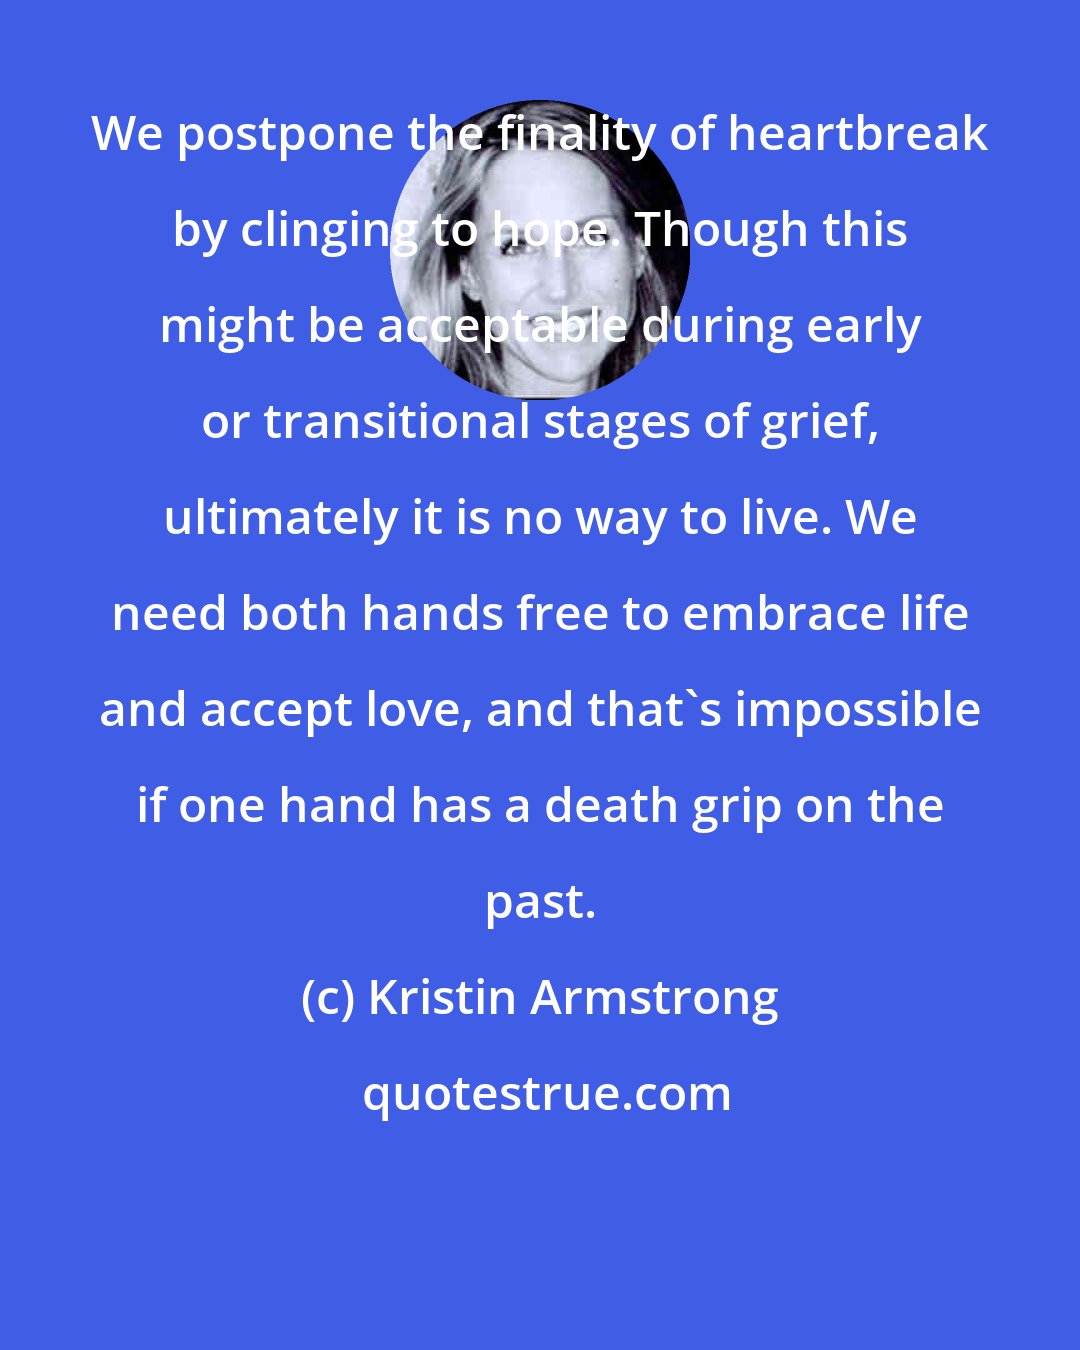 Kristin Armstrong: We postpone the finality of heartbreak by clinging to hope. Though this might be acceptable during early or transitional stages of grief, ultimately it is no way to live. We need both hands free to embrace life and accept love, and that's impossible if one hand has a death grip on the past.